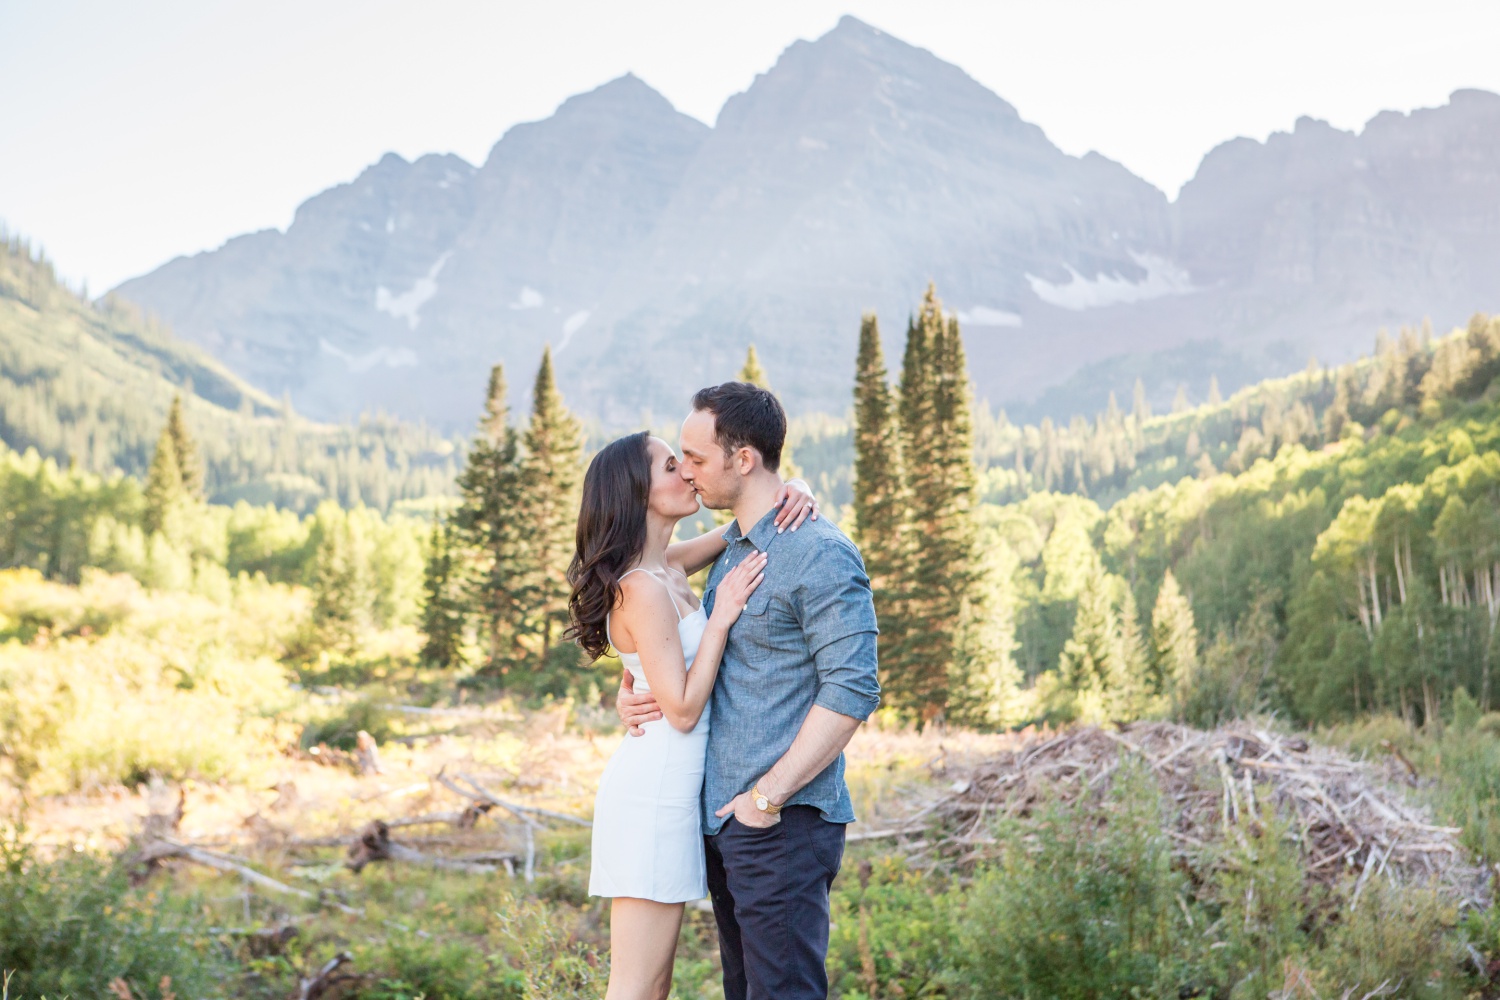 Proposal photographer at Maroon Bells in Colorado